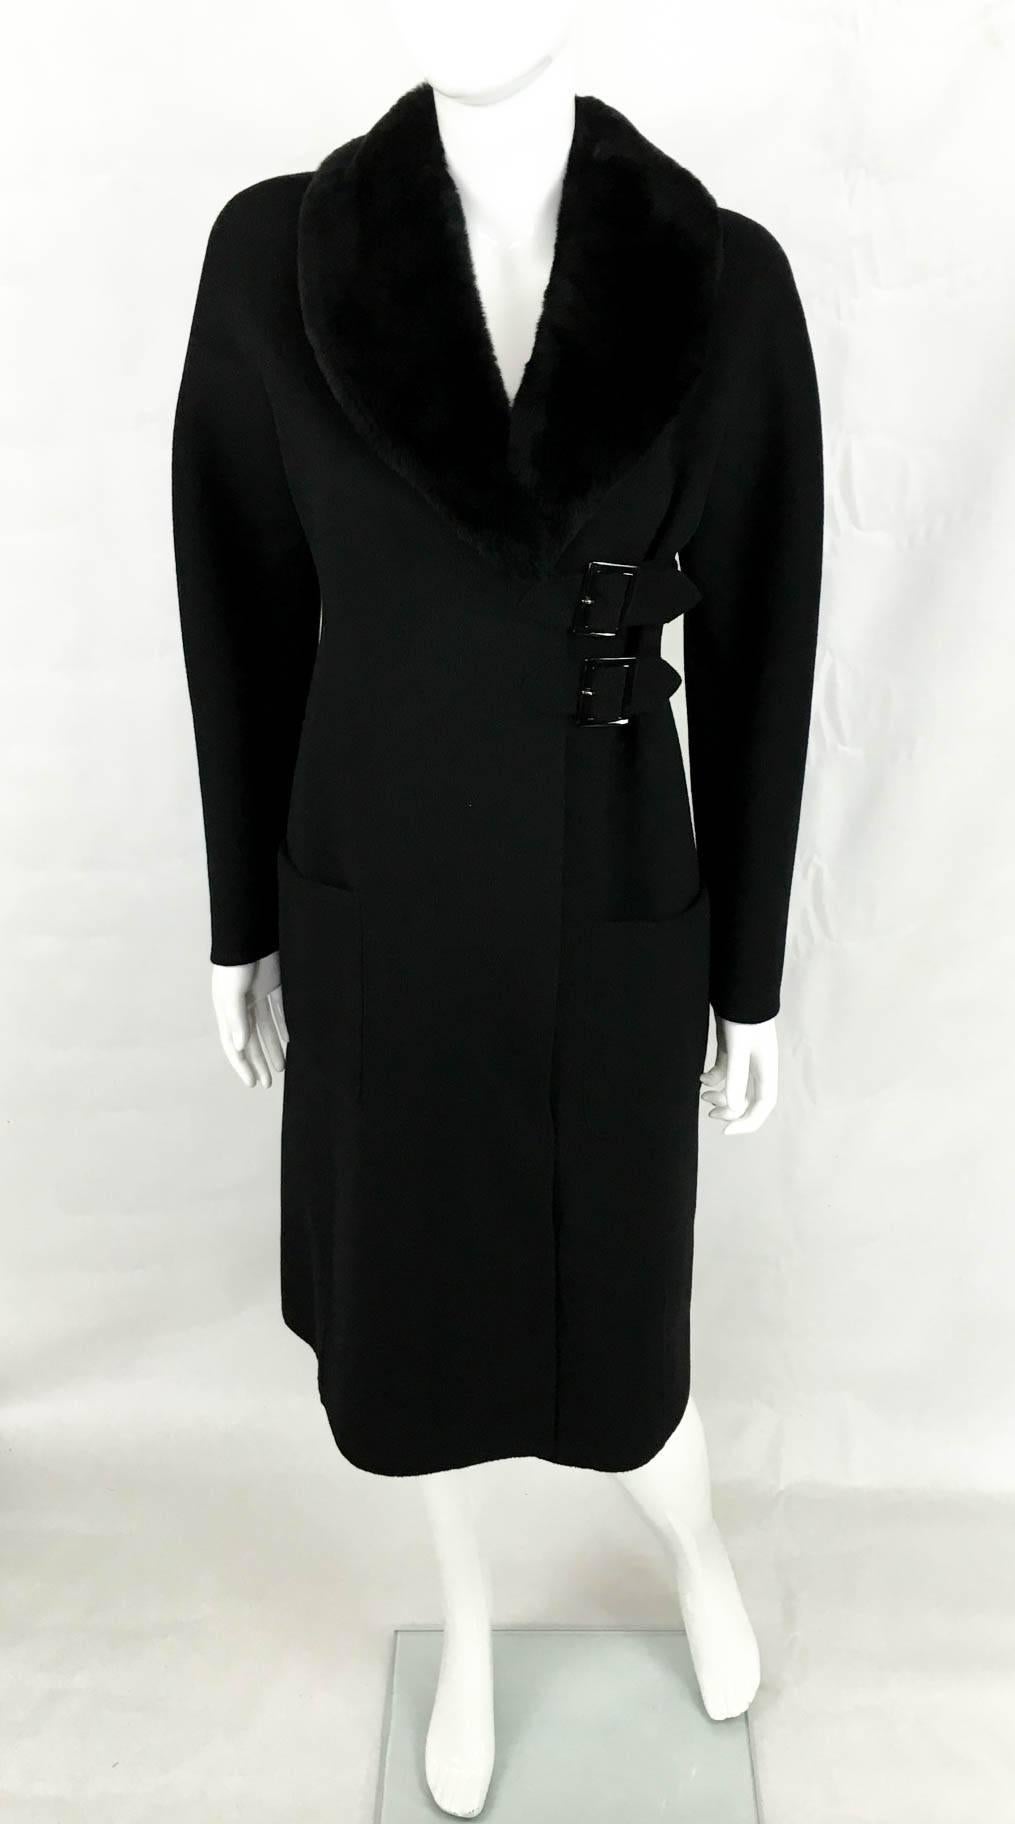 Fabulous Vintage Valentino Wool Coat. This ravishing coat features two side pockets, with two buckles for a high cinched in waist, below the knee length and a glamorous and ultra-soft chinchilla fur collar. This is a great and timeless key piece